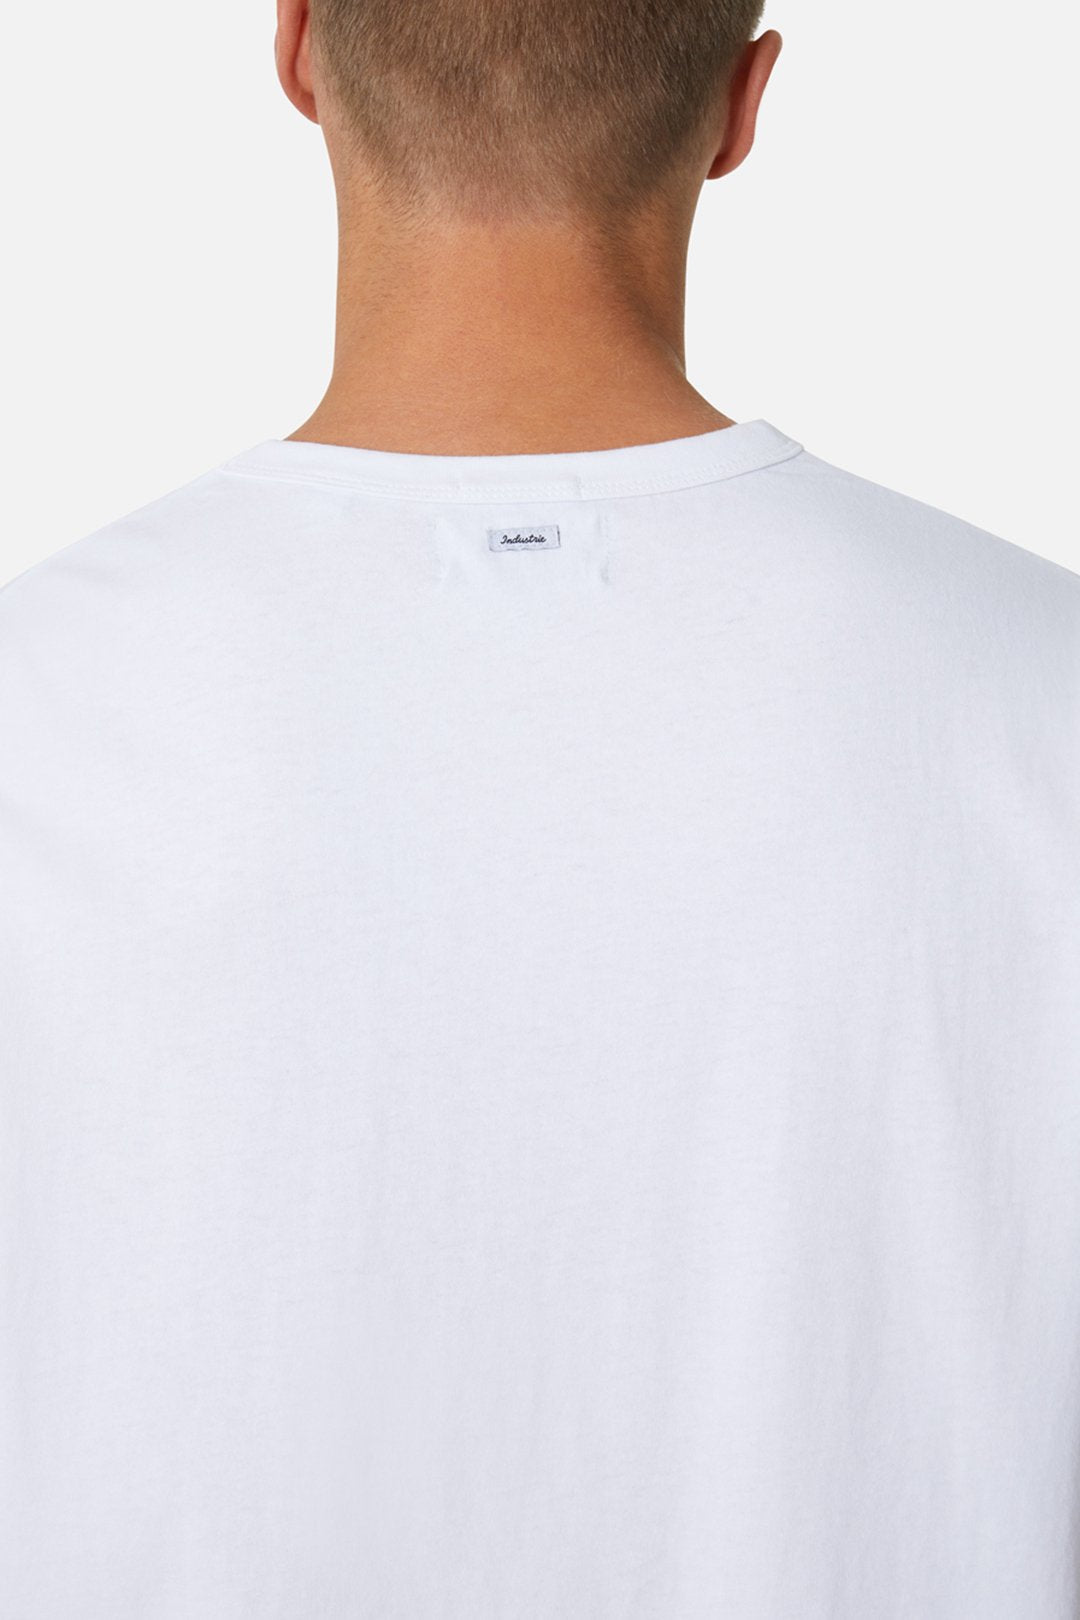 INDUSTRIE - The Del Sur Tee - WHITE